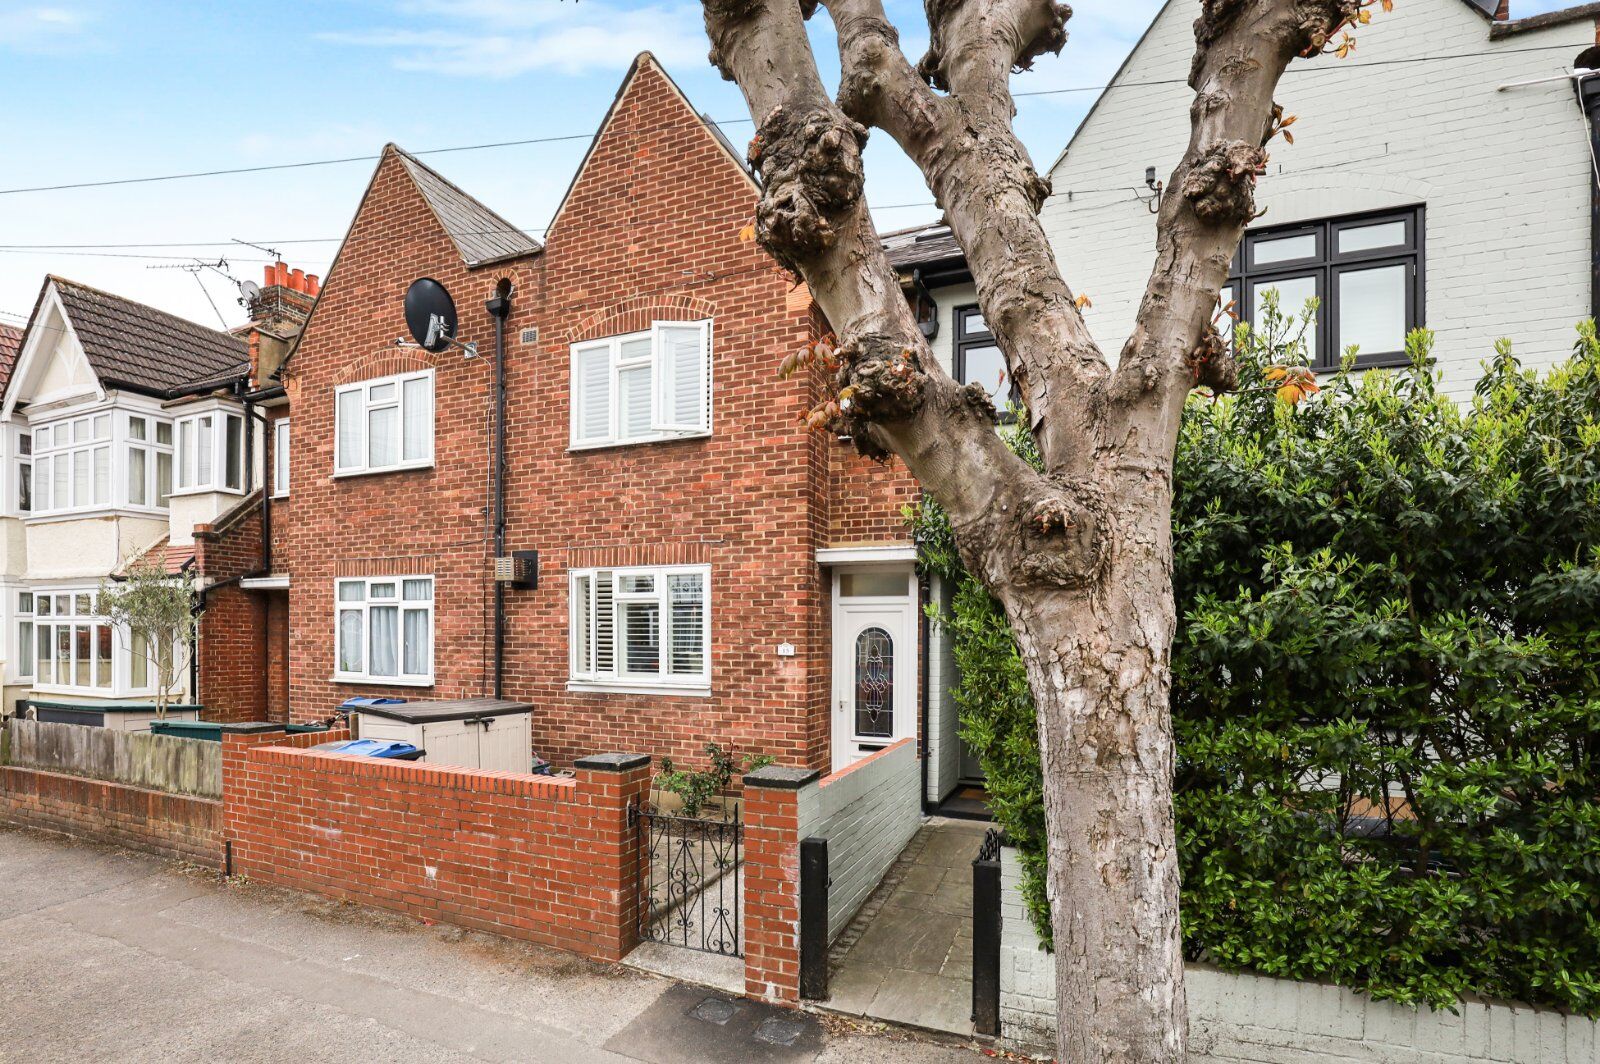 4 bedroom mid terraced house for sale Mina Road, Wimbledon, SW19, main image